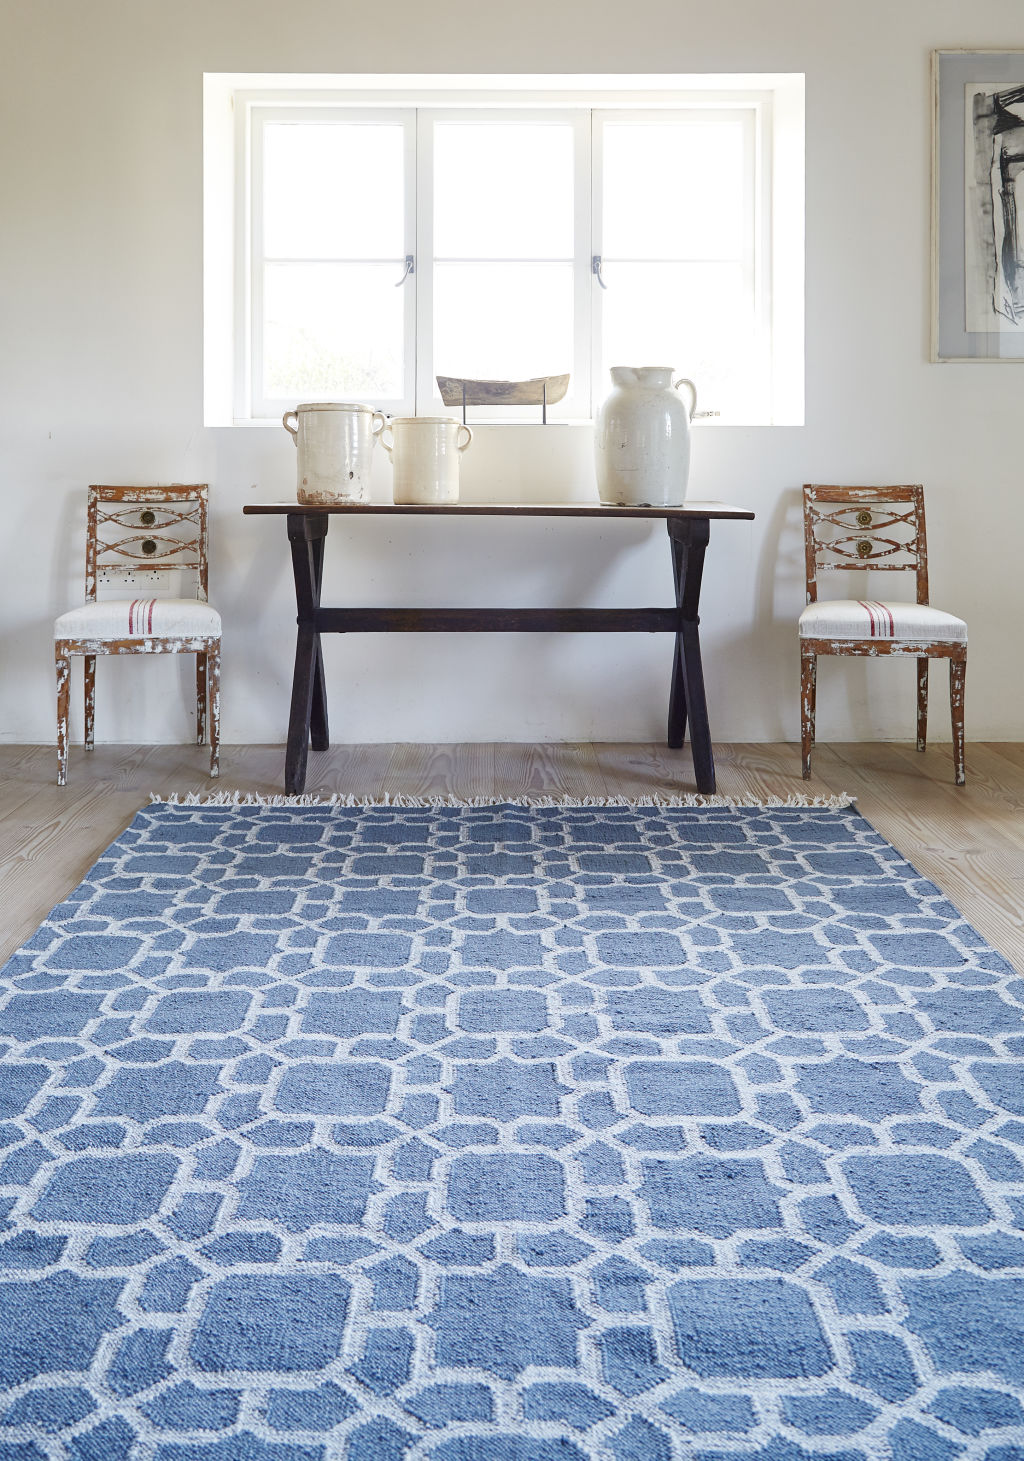 Weaver Green rugs are made from 100 per cent recycled materials. Photo: Paul Ryan-Goff